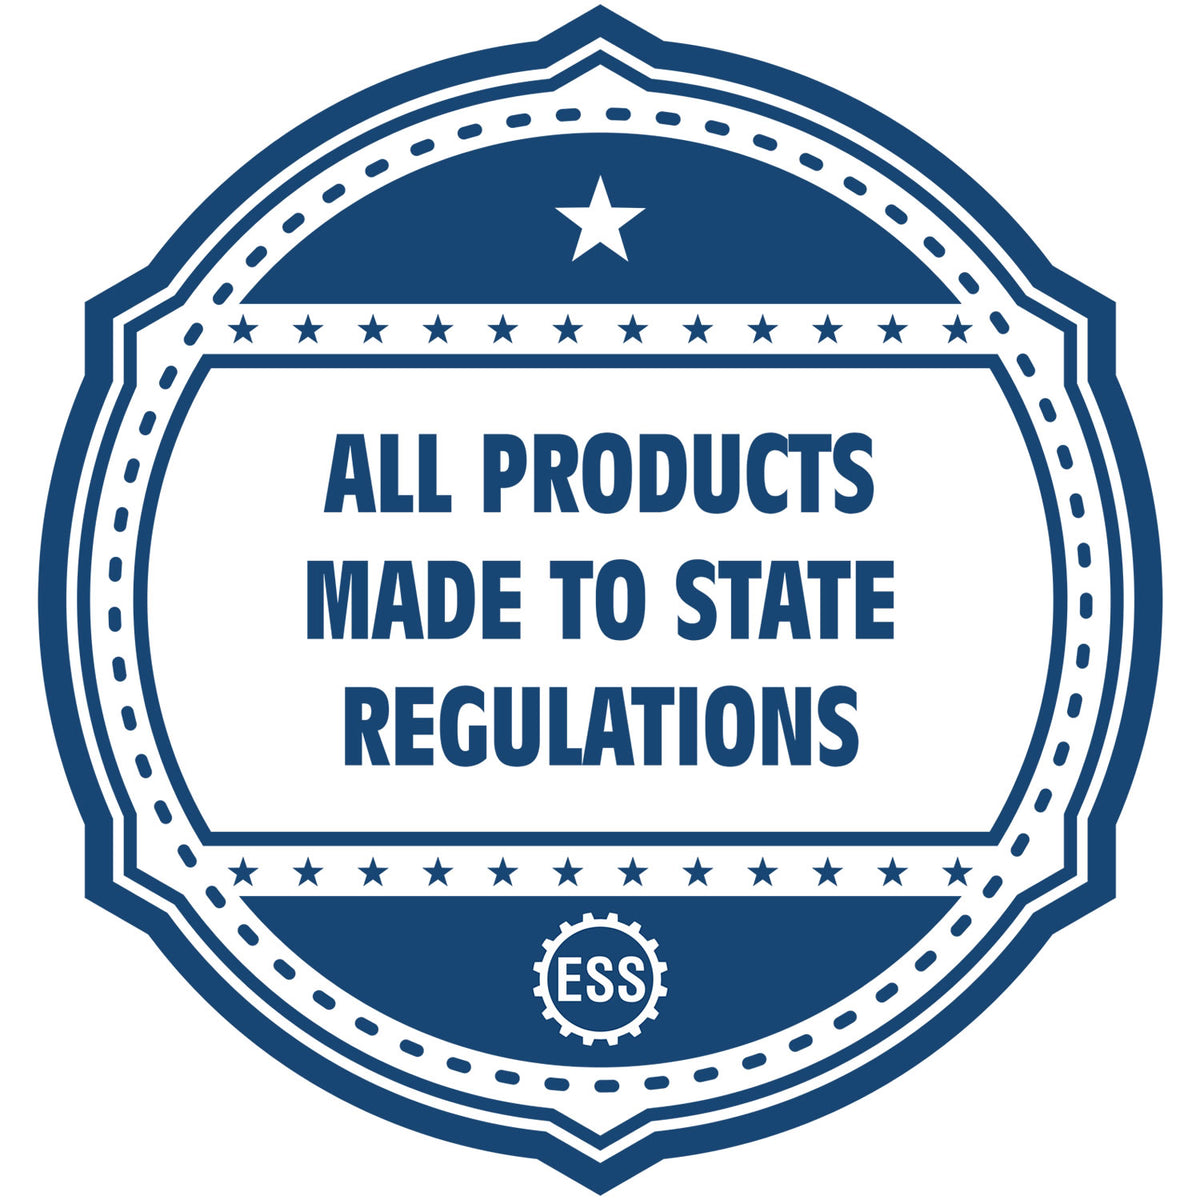 An icon or badge element for the Self-Inking Utah PE Stamp showing that this product is made in compliance with state regulations.